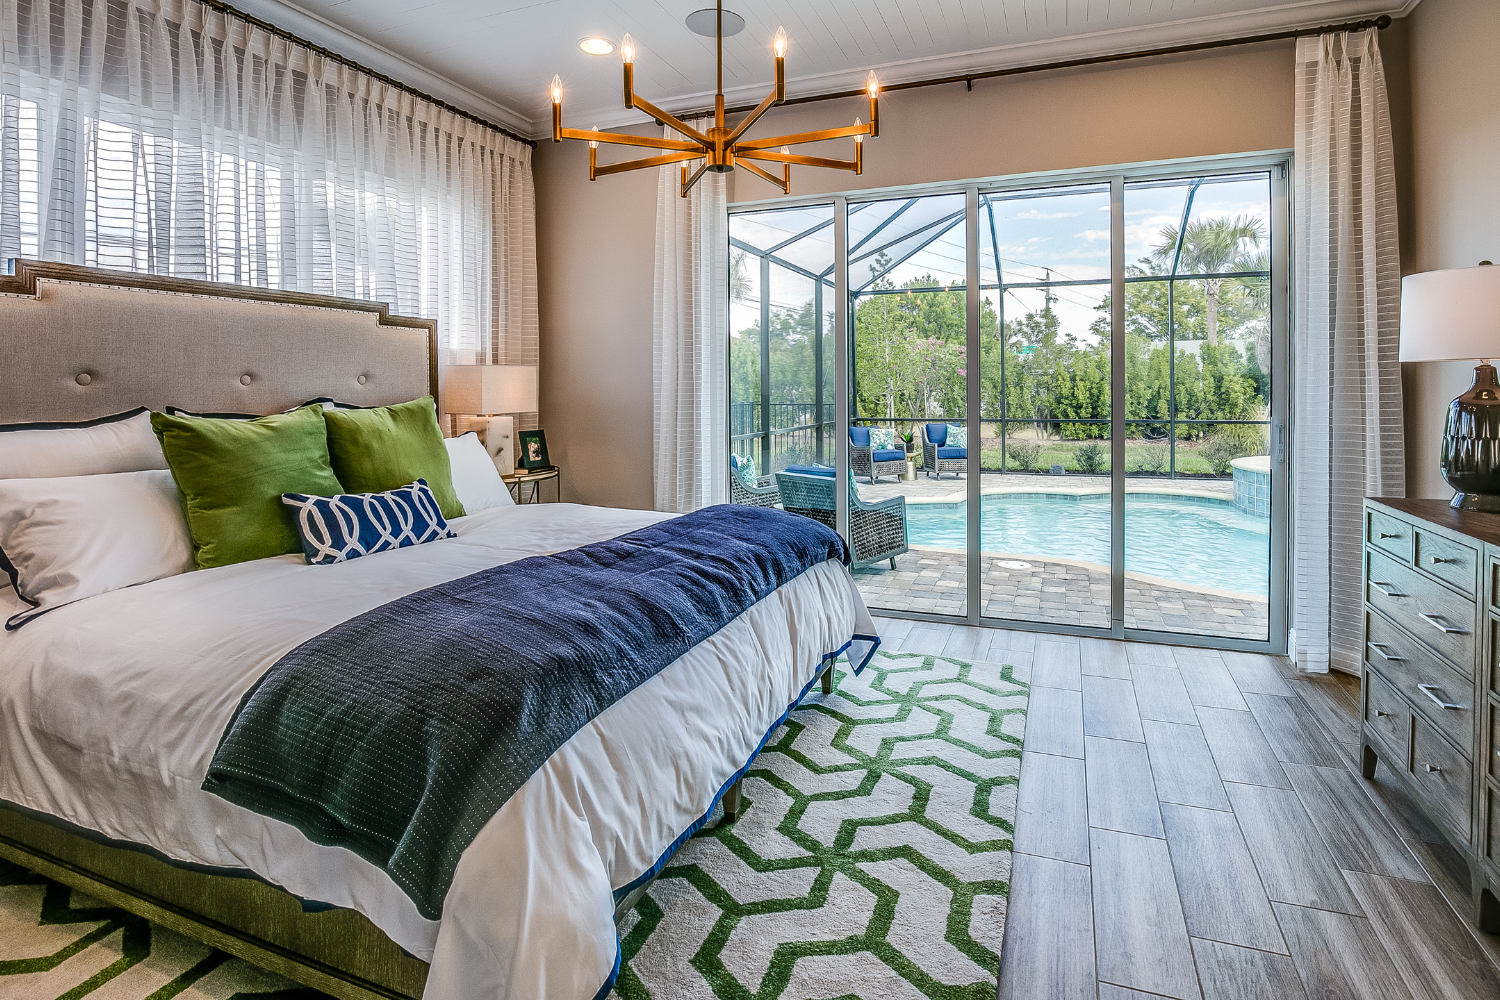 pamela-sandall-malibu-ca-how-to-stage-a-primary-bedroom-welcoming-bedroom-with-pops-of-greens-and-blues